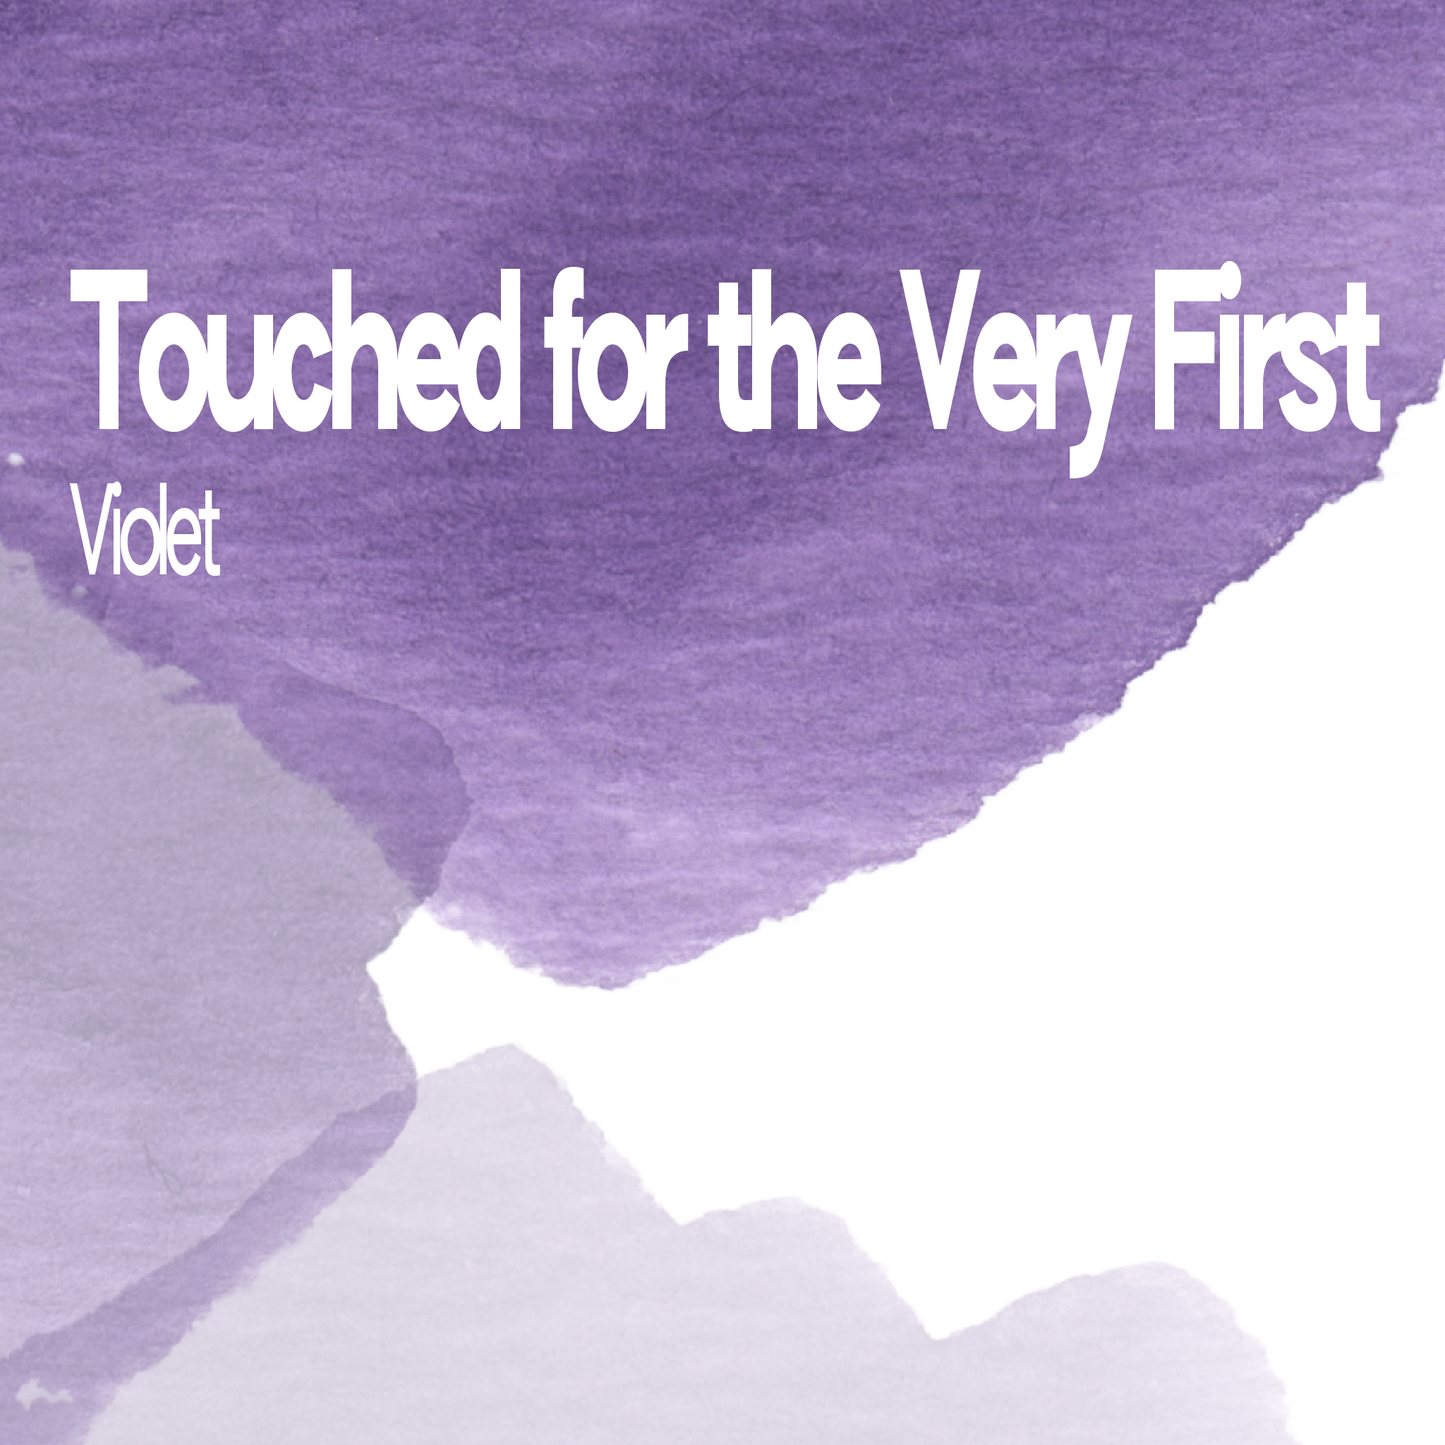 Touched for the very first Violet aquarelle artisanale vegan 